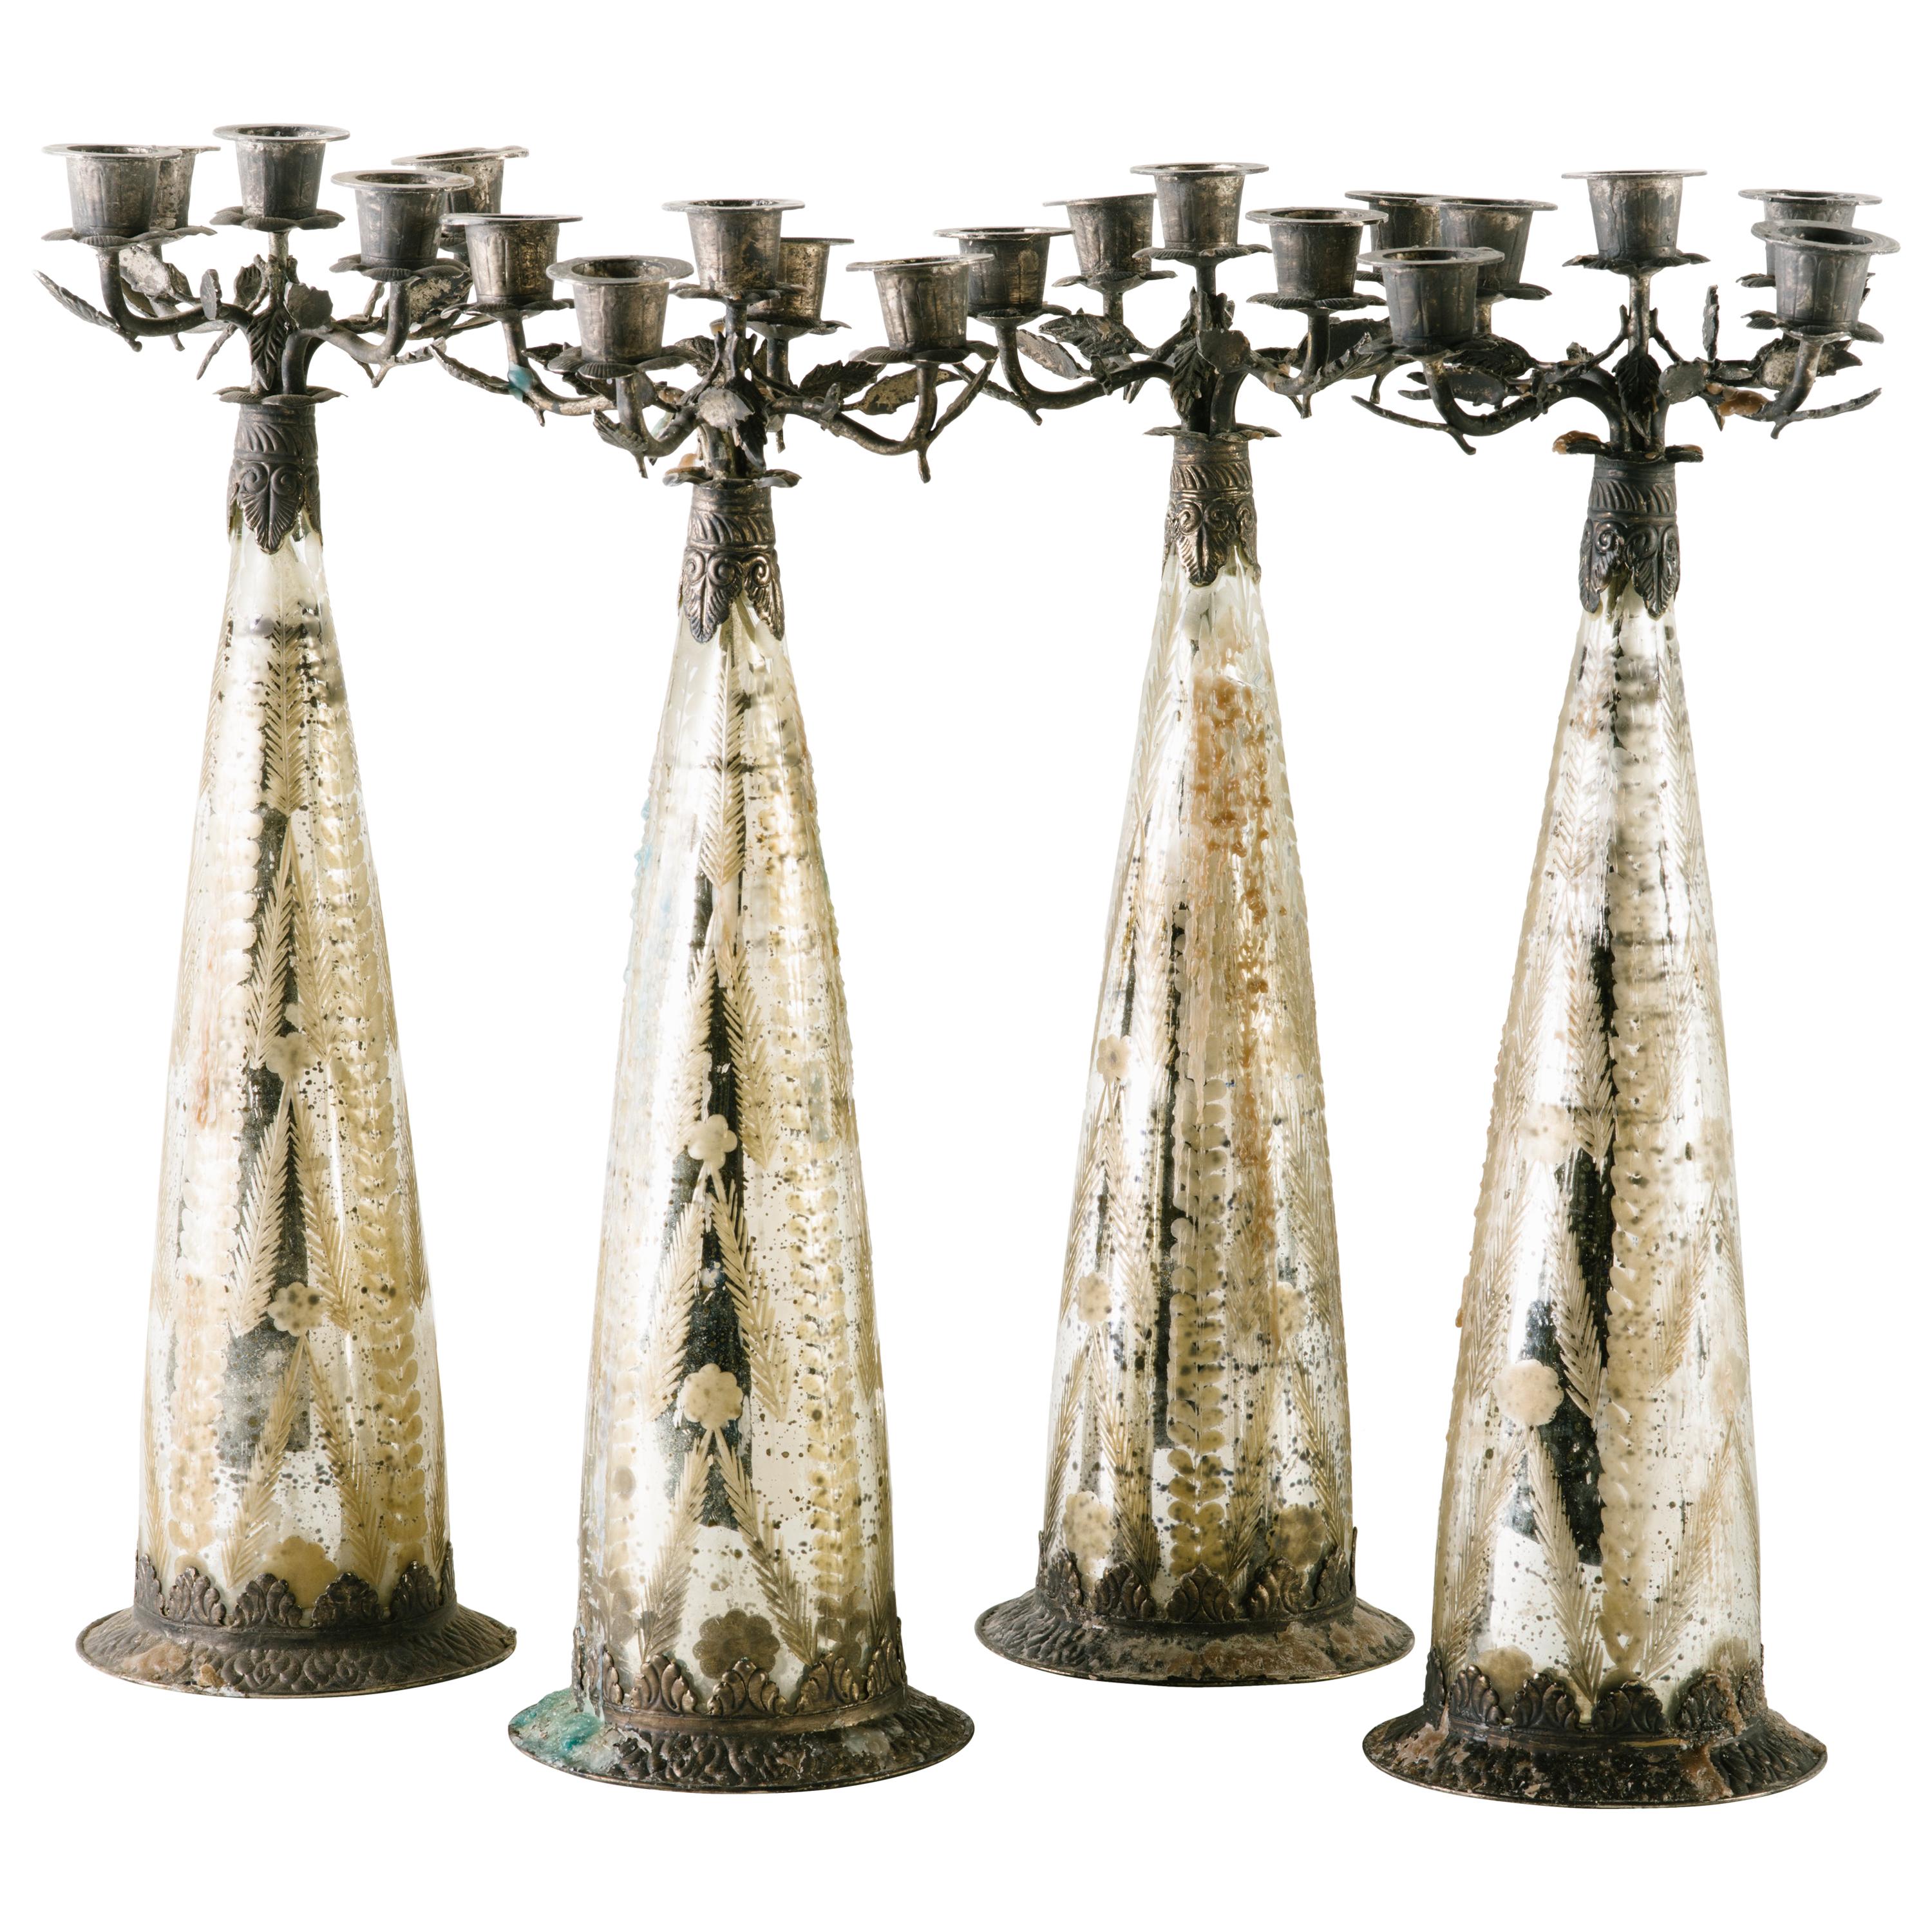 Set of Gothic Candelabra in Etched Mercury Glass and Hand-Forged Metal